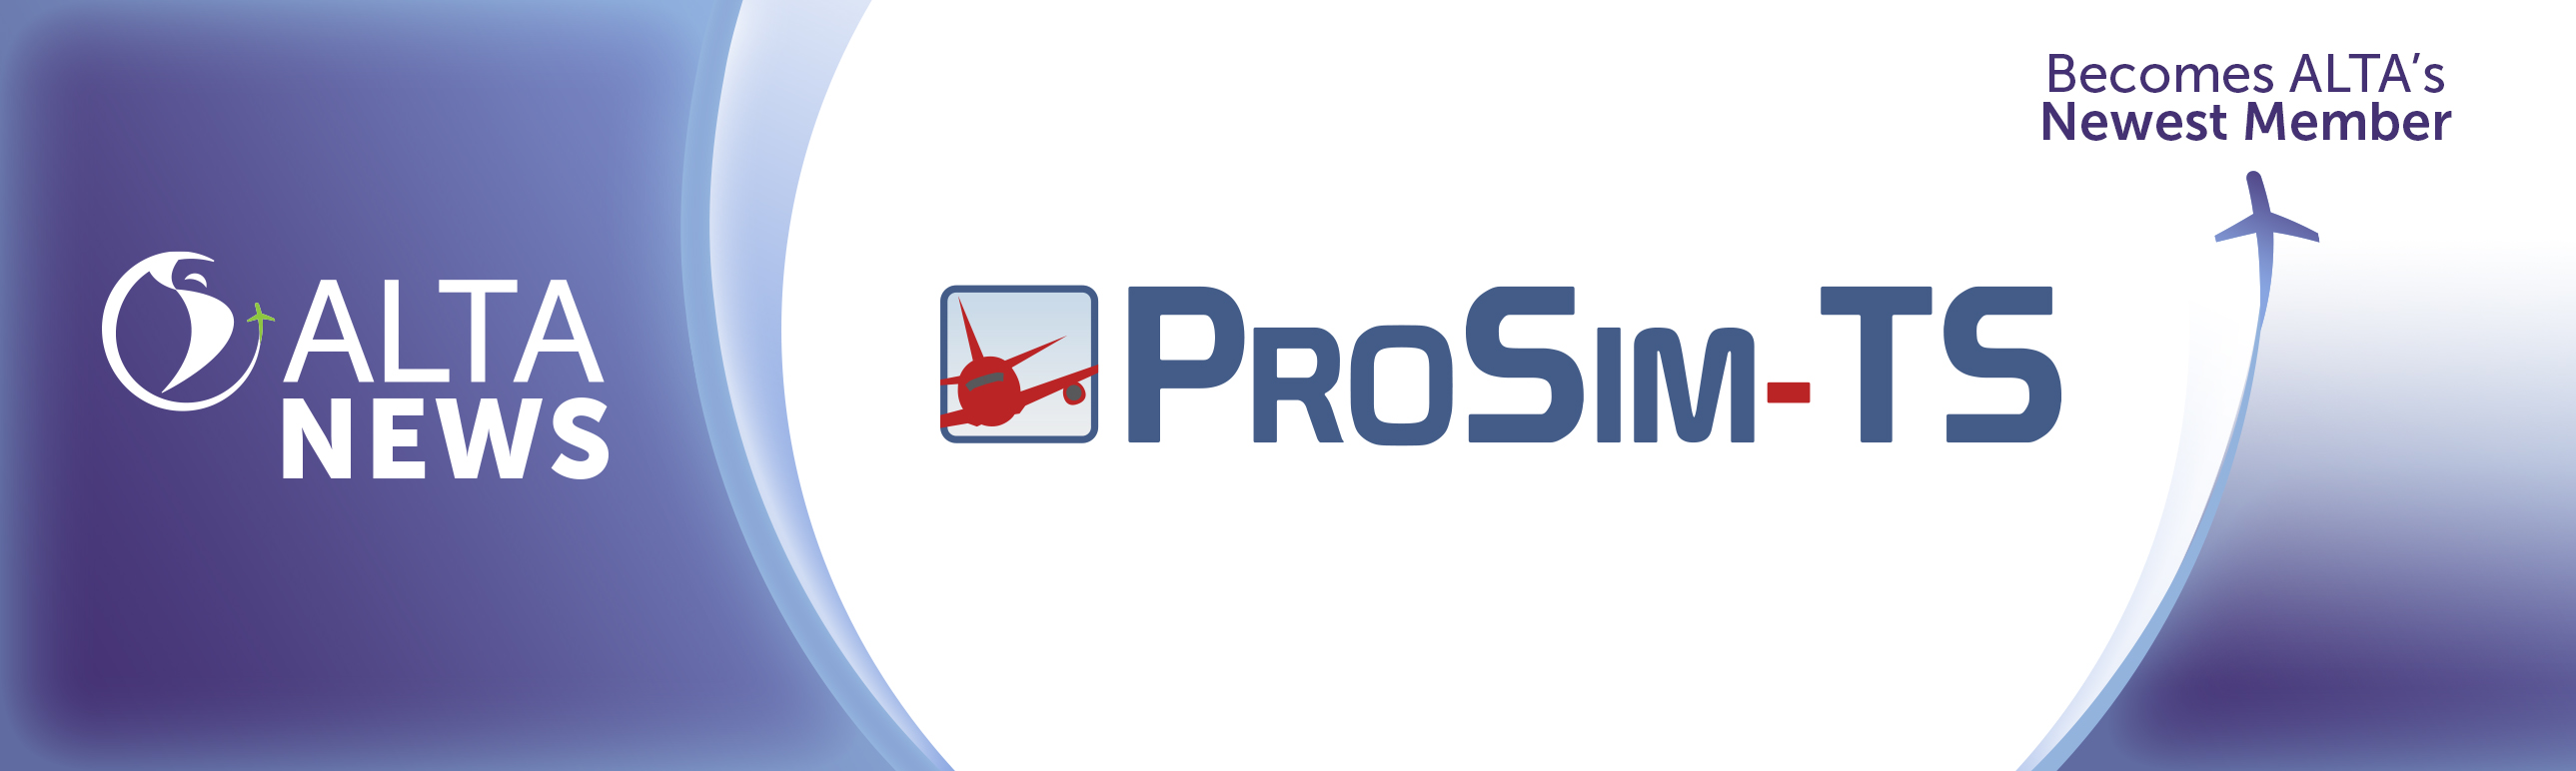 ALTA NEWS - Welcome aboard, ProSim Training Solutions!